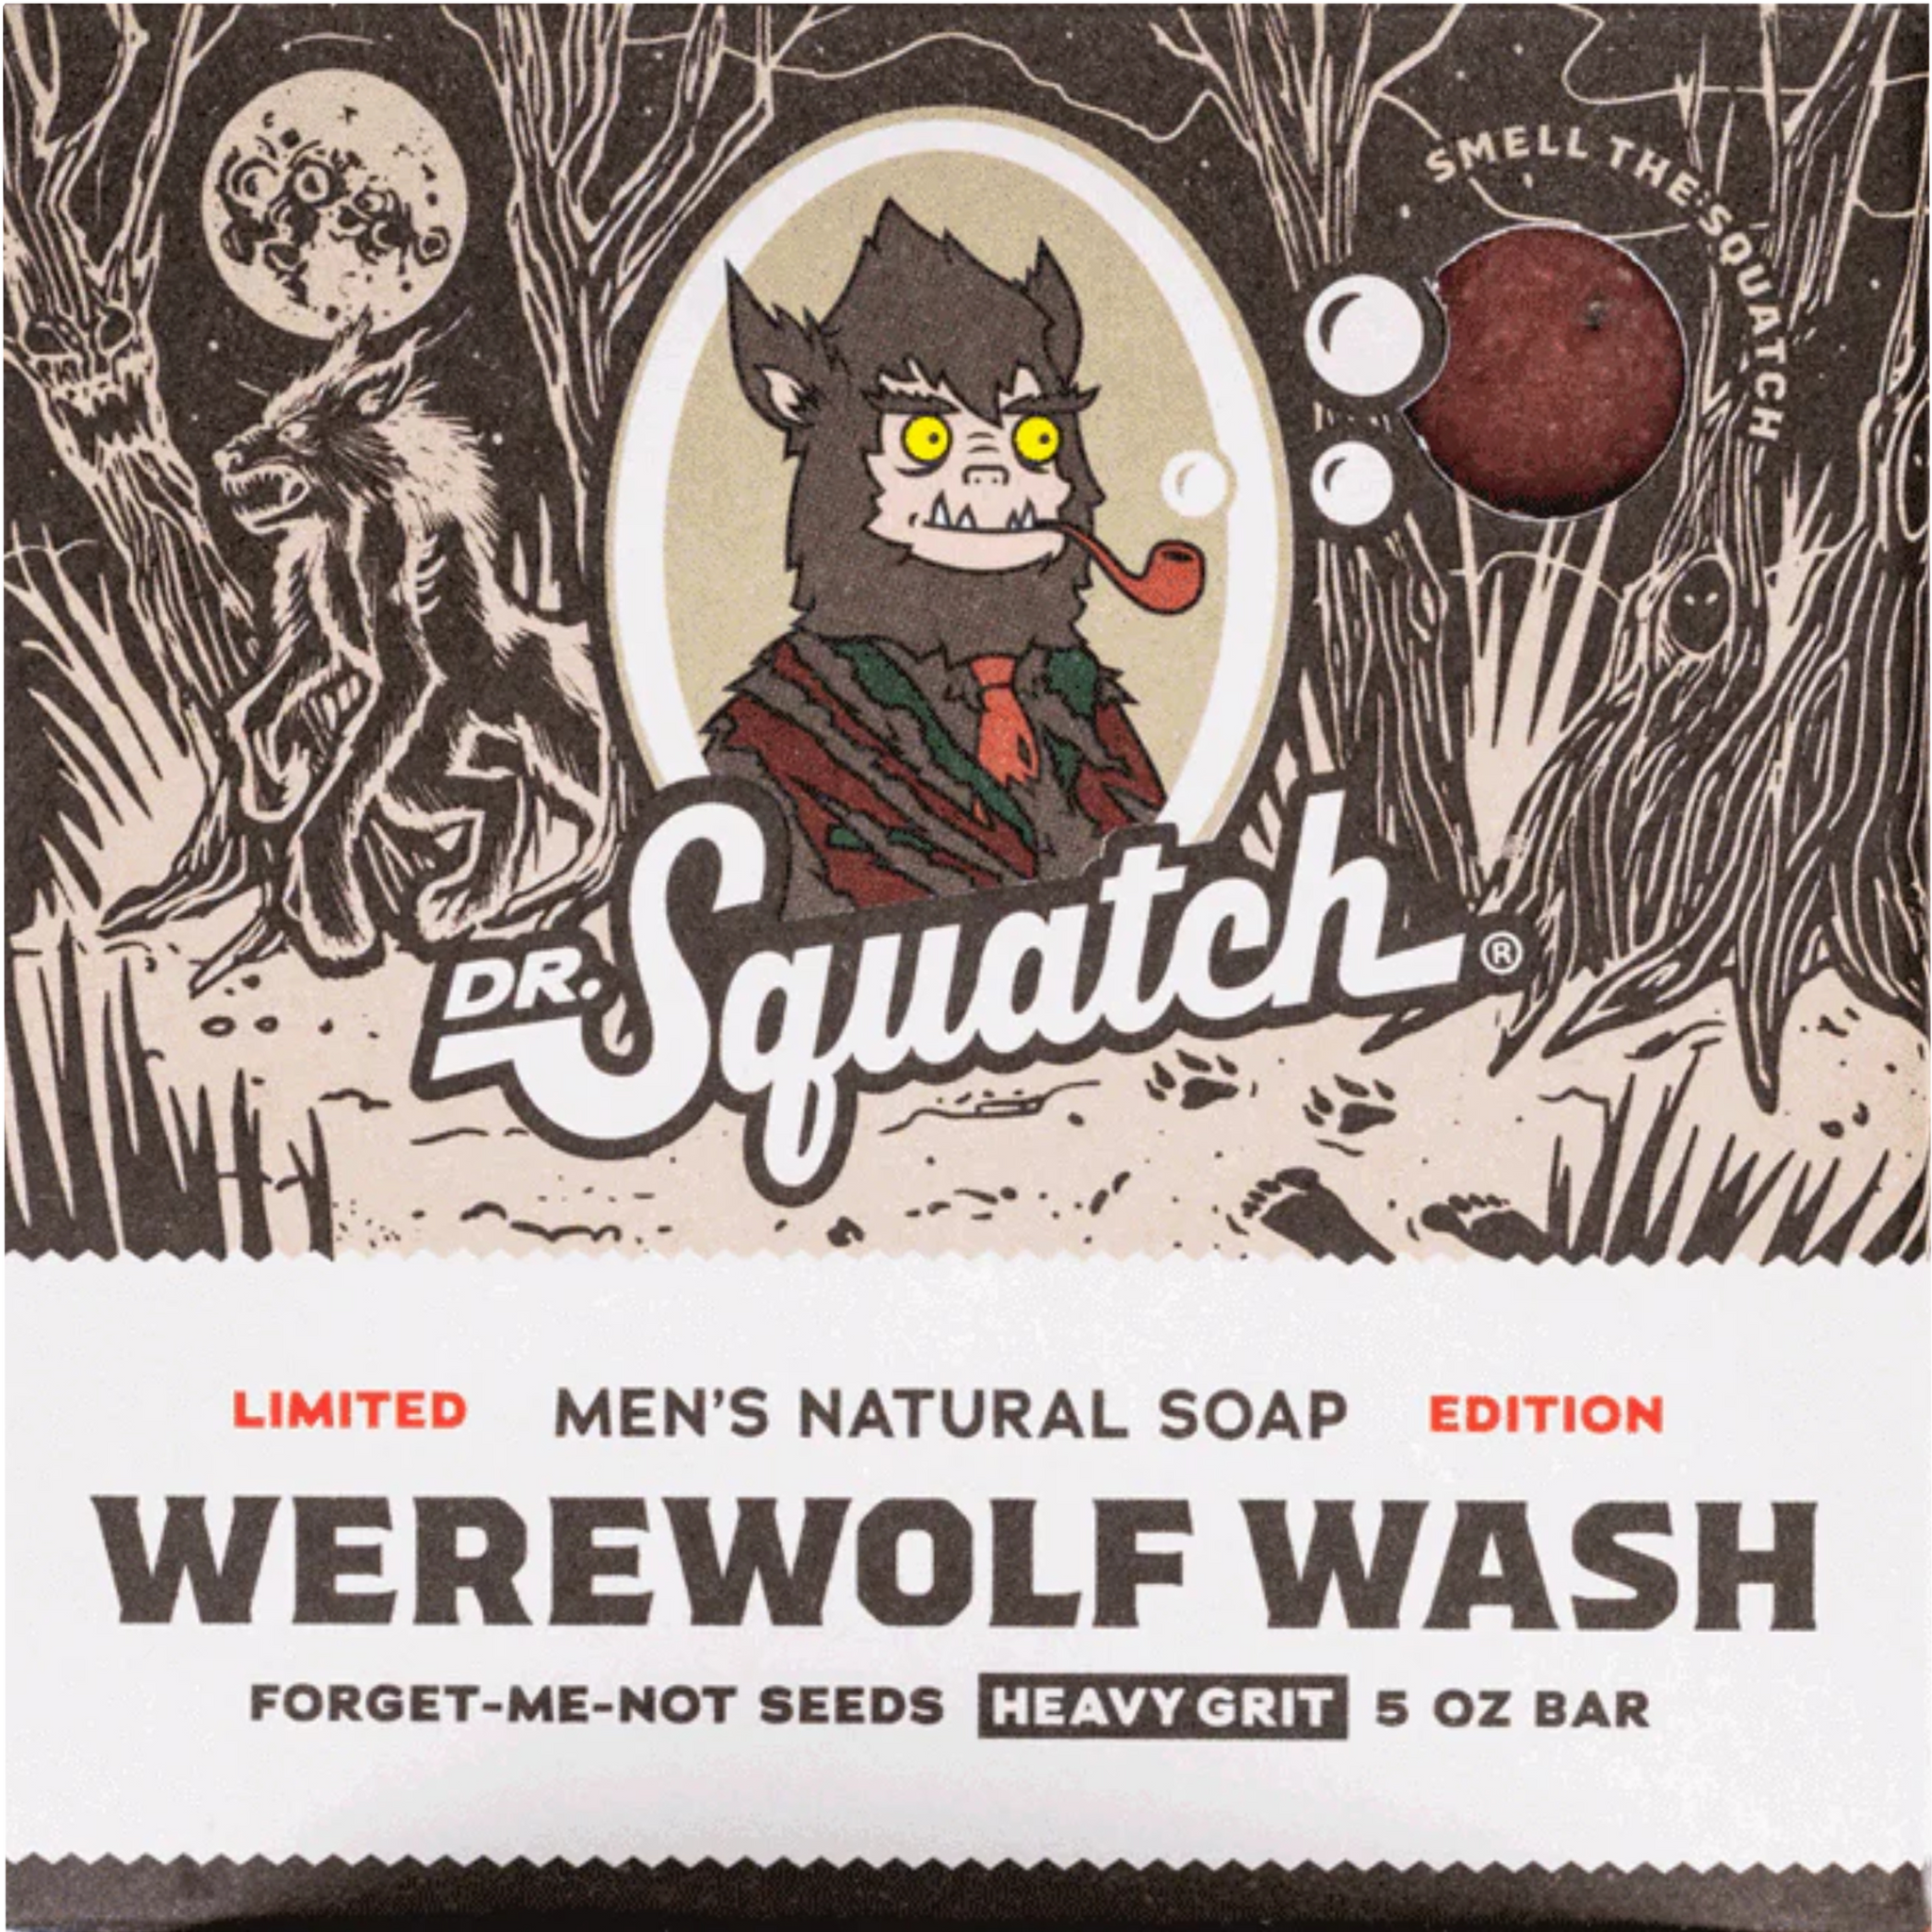 Doctor Squatch: Real Men Need Real Soap